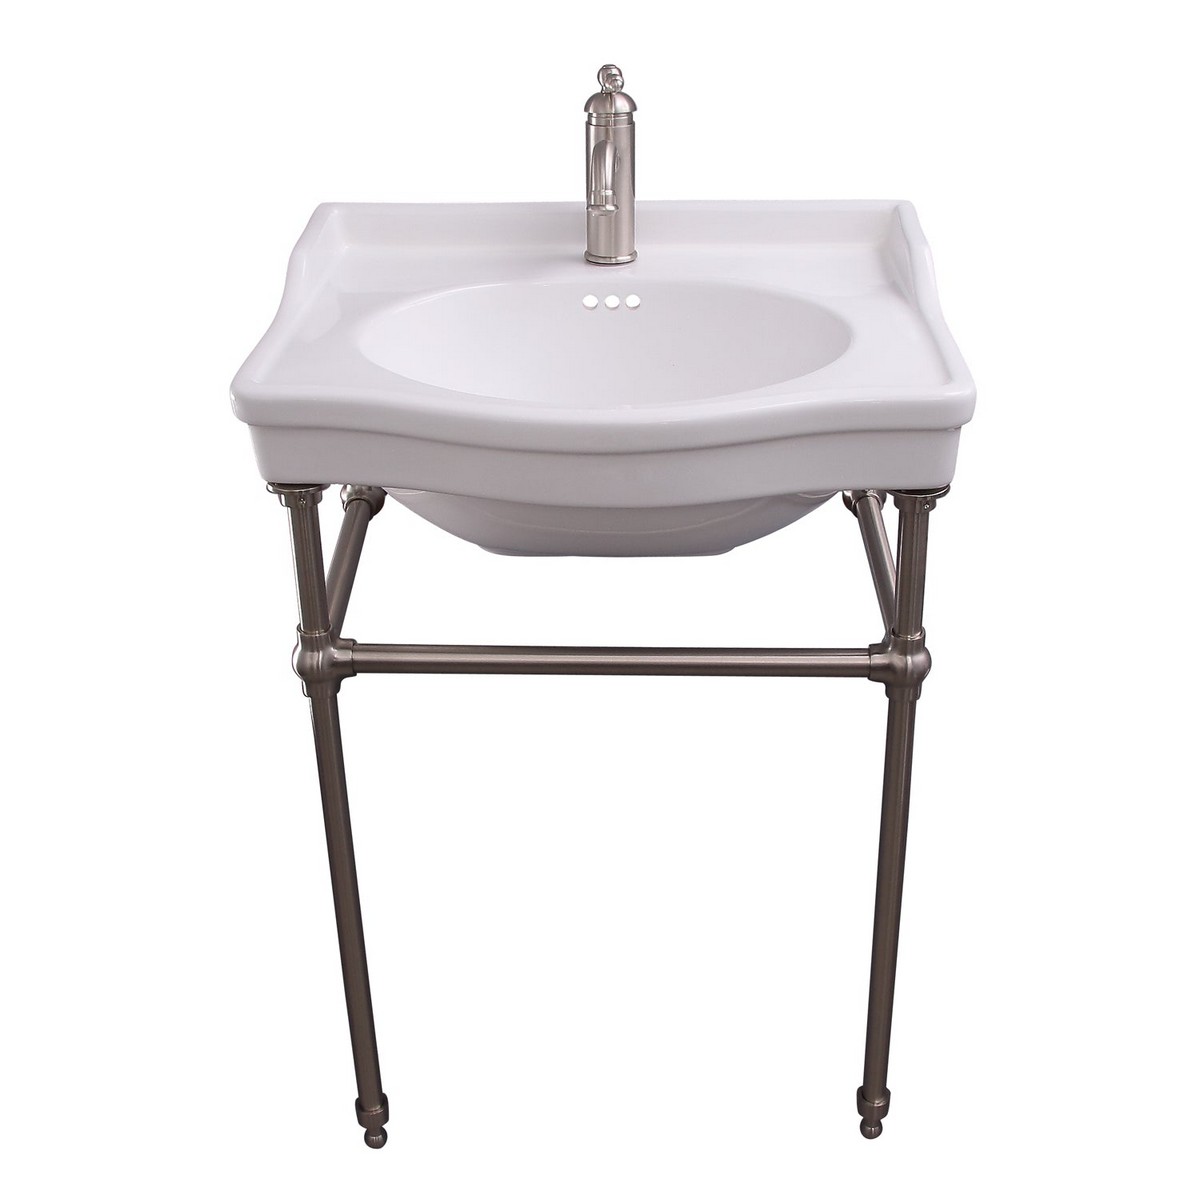 BARCLAY 75WH ENSAL 30 1/4 INCH CONSOLE BATHROOM SINK WITH STAND